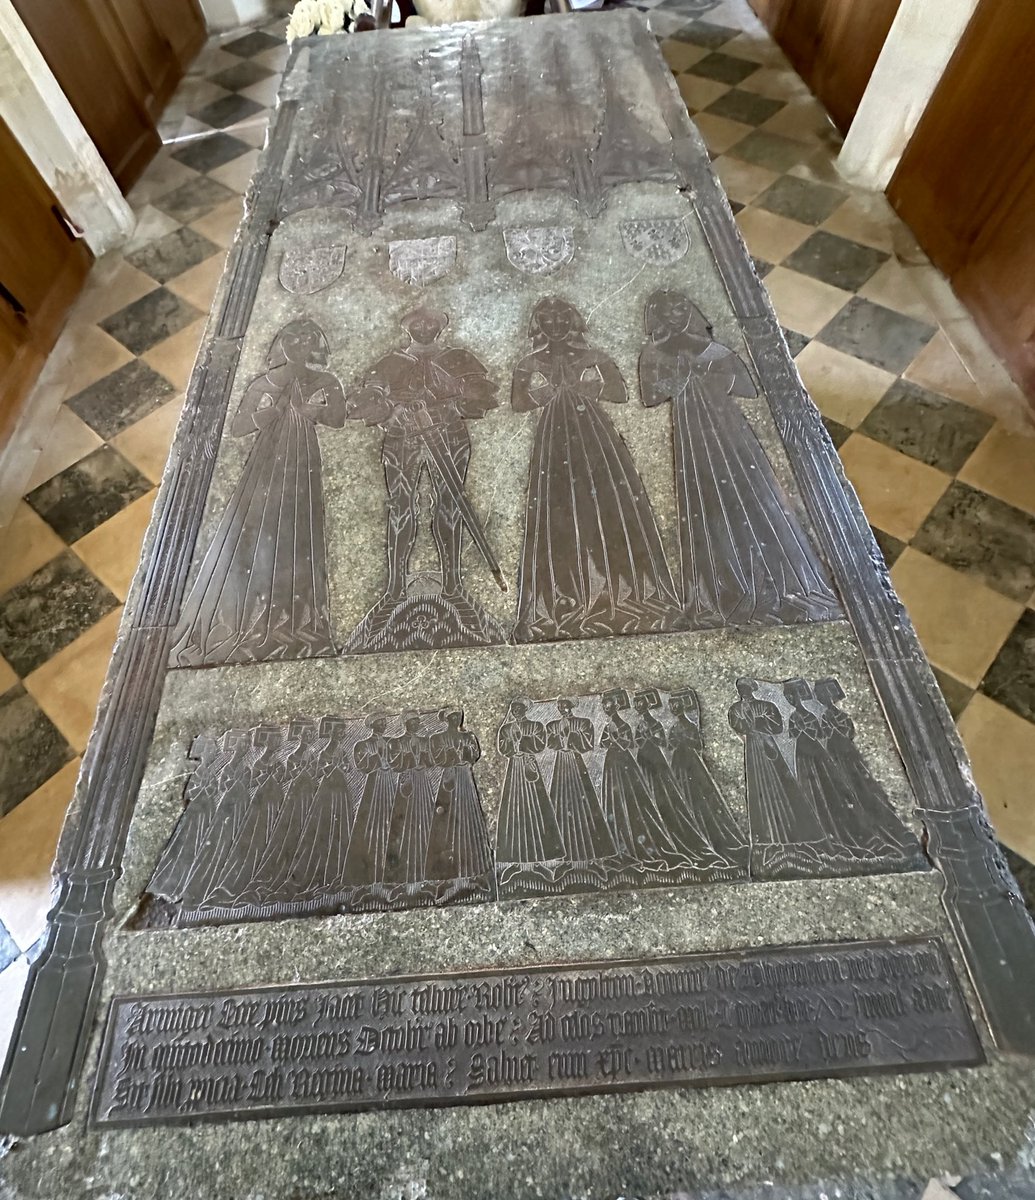 Robert Thornton d.1472 with his three wives and sixteen children! St Michael, Thornton, Bucks. The tomb was found in separate parts of a C18 grotto in the grounds of the girls school in which the church sits. CCT church but prob doubles as the school chapel.